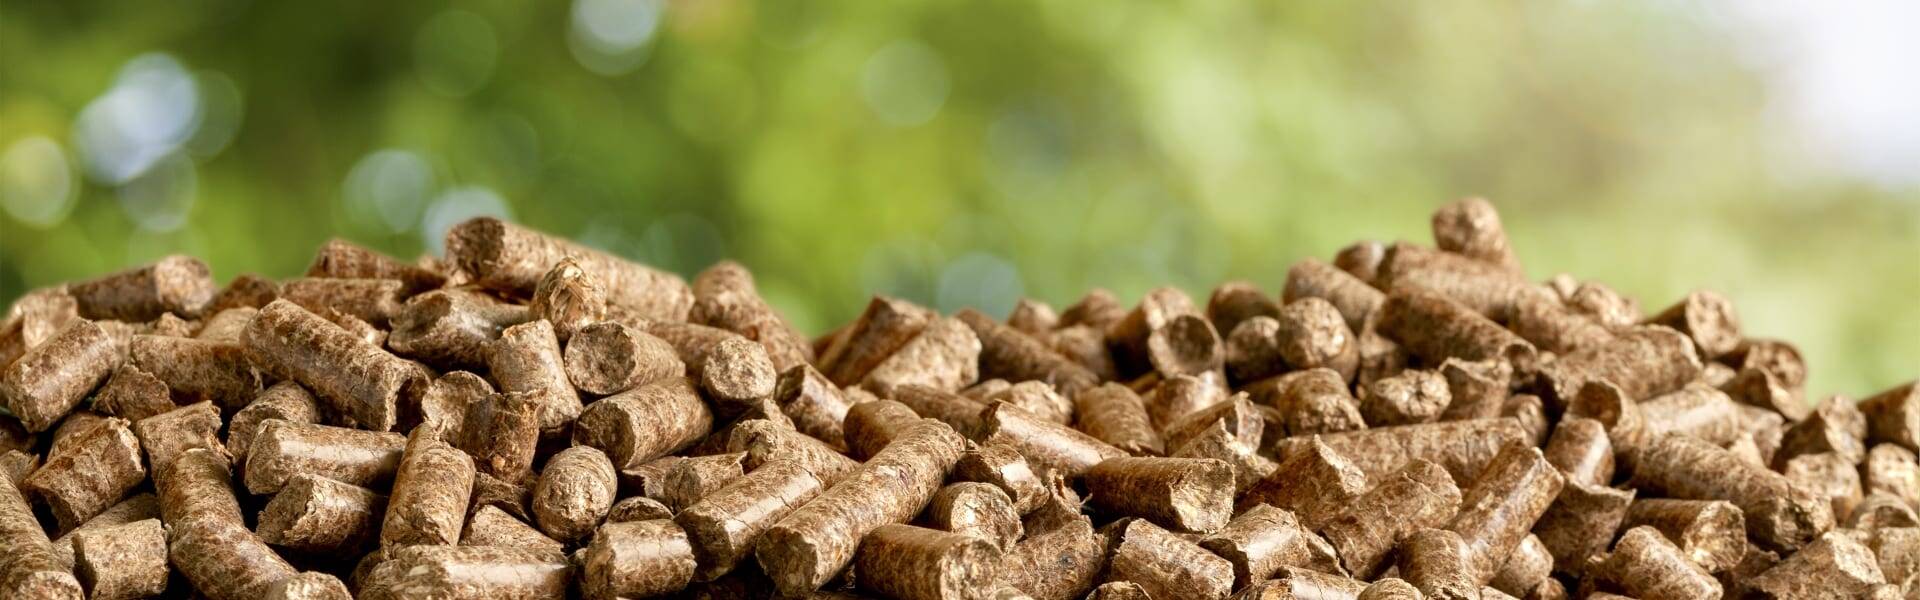 Drax faces challenge over biomass claims